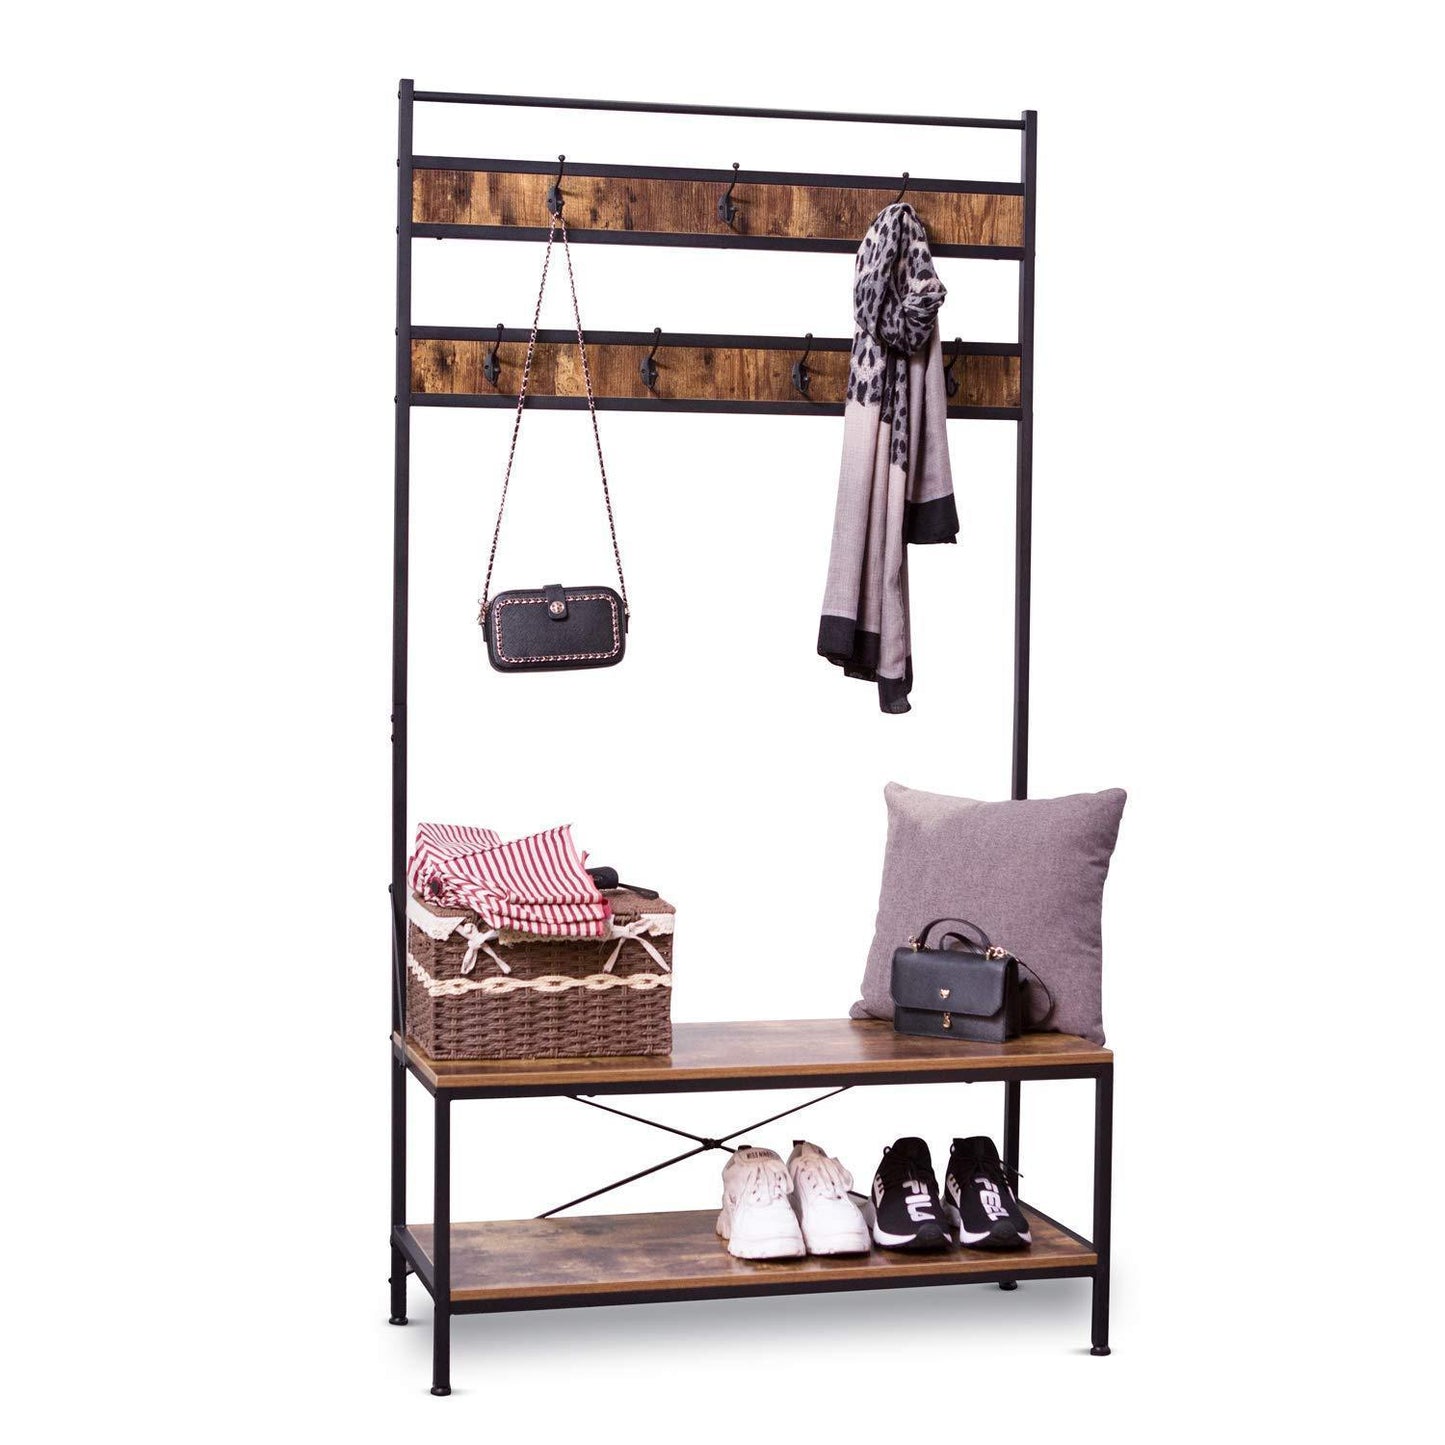 IRONCK Coat Rack Free Standing, Hall Tree, Industrial Entryway Organizer, Coat Stand with Storage Bench, MDF Board Multifunctional Sturdy Metal Frame, Large Size